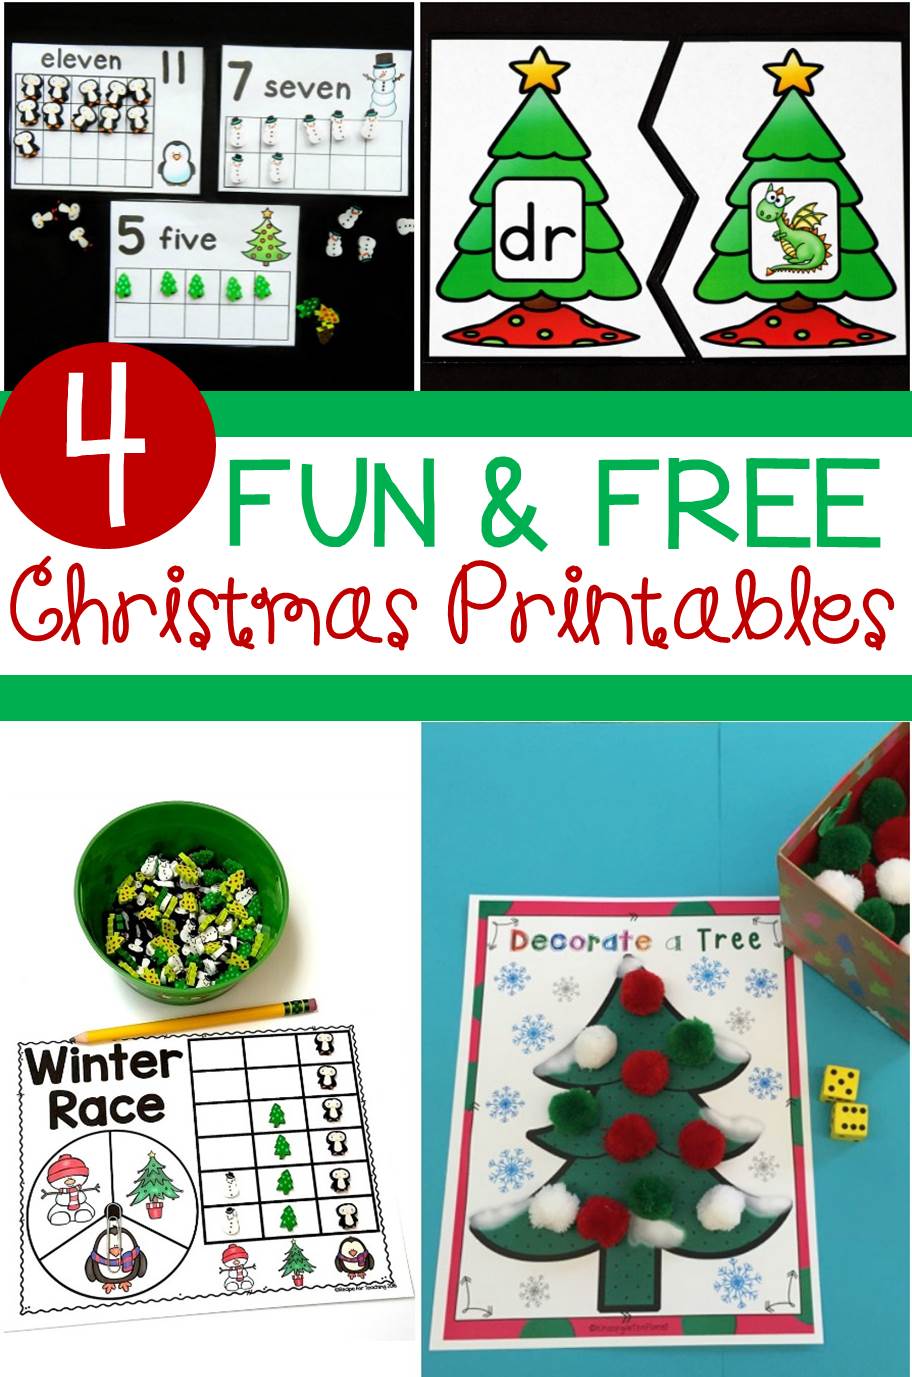 Christmas Printable | Christmas Tree Blend Printable Puzzles is the perfect addition to your literacy centers this holiday season. This free printable is great for kindergarten, first grade, and second grade students.